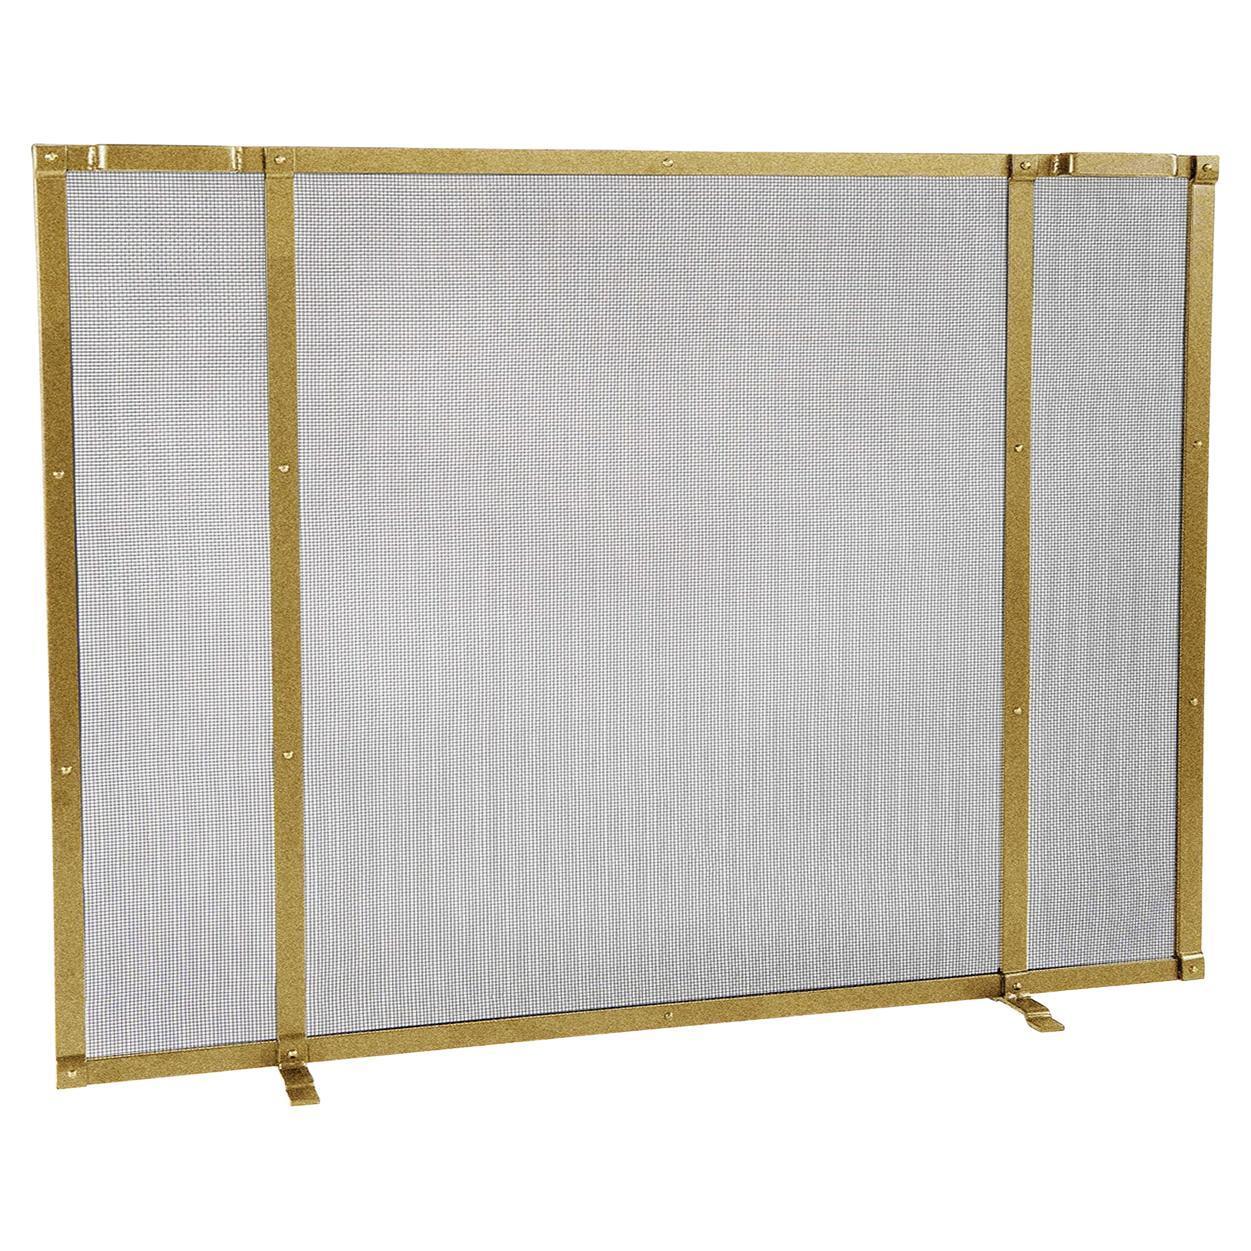 Gunnison Fireplace Screen in a Brilliant Gold Finish For Sale